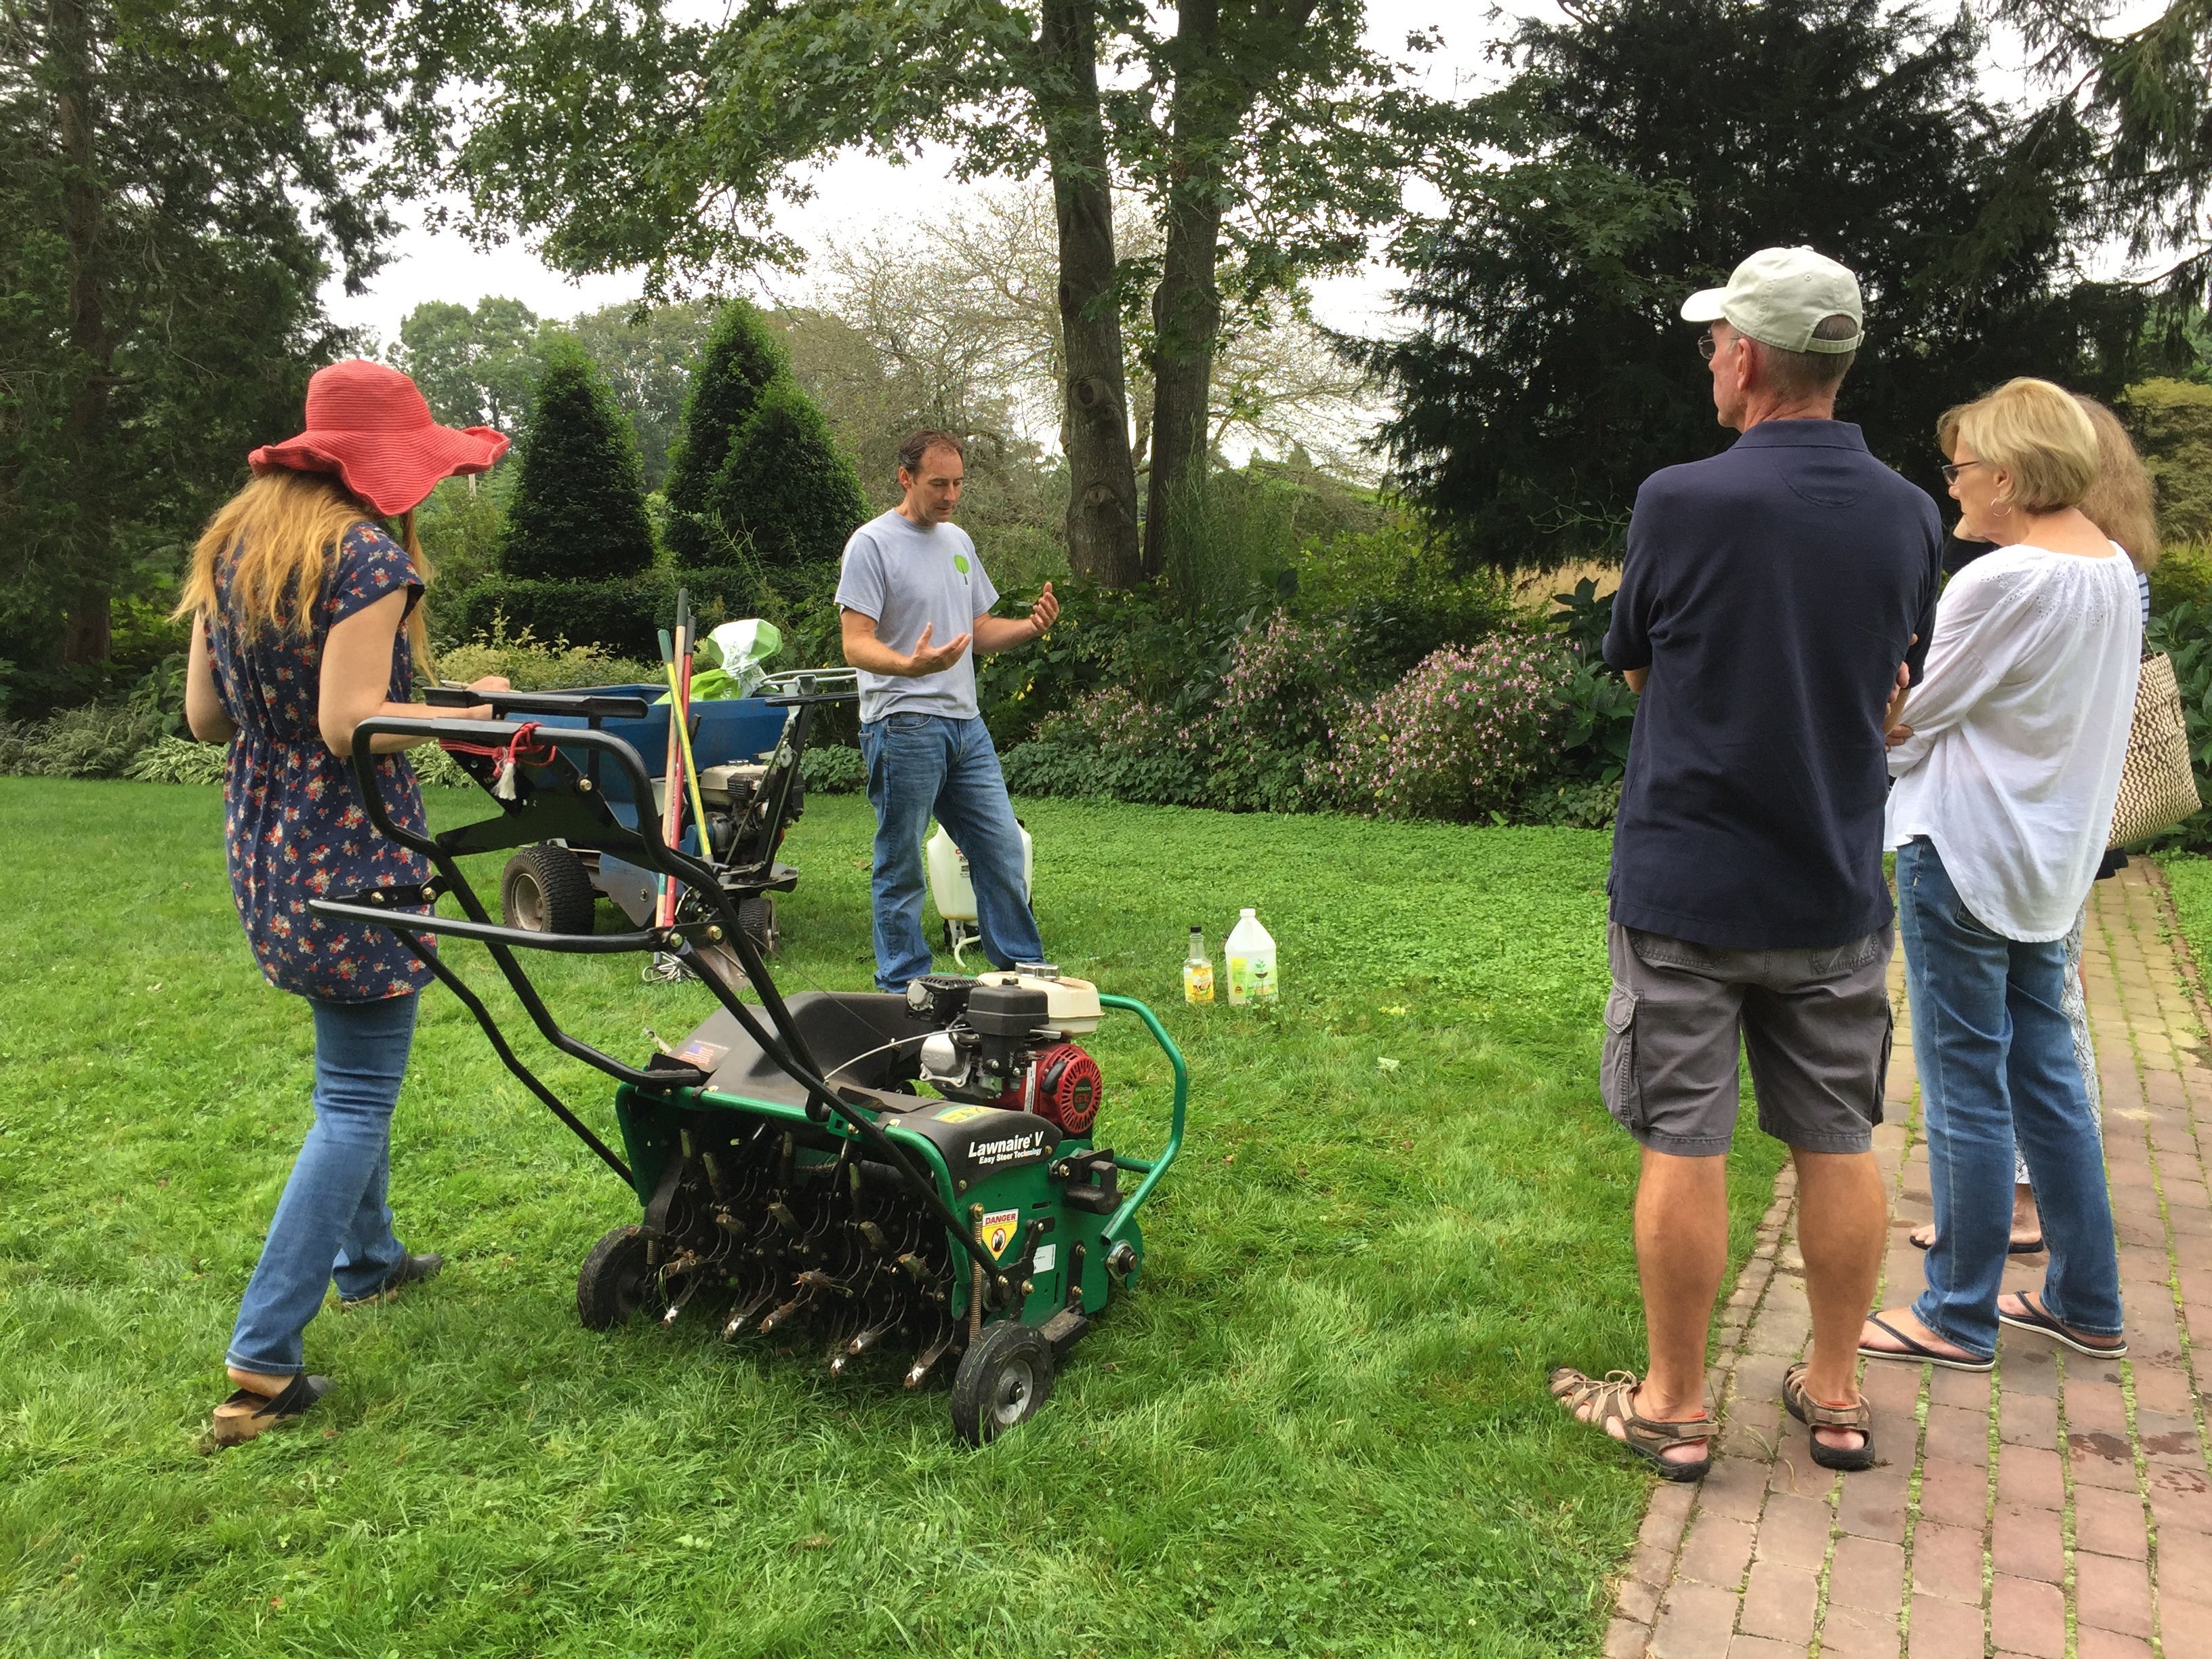 Paul Wagner demonstrating lawn care